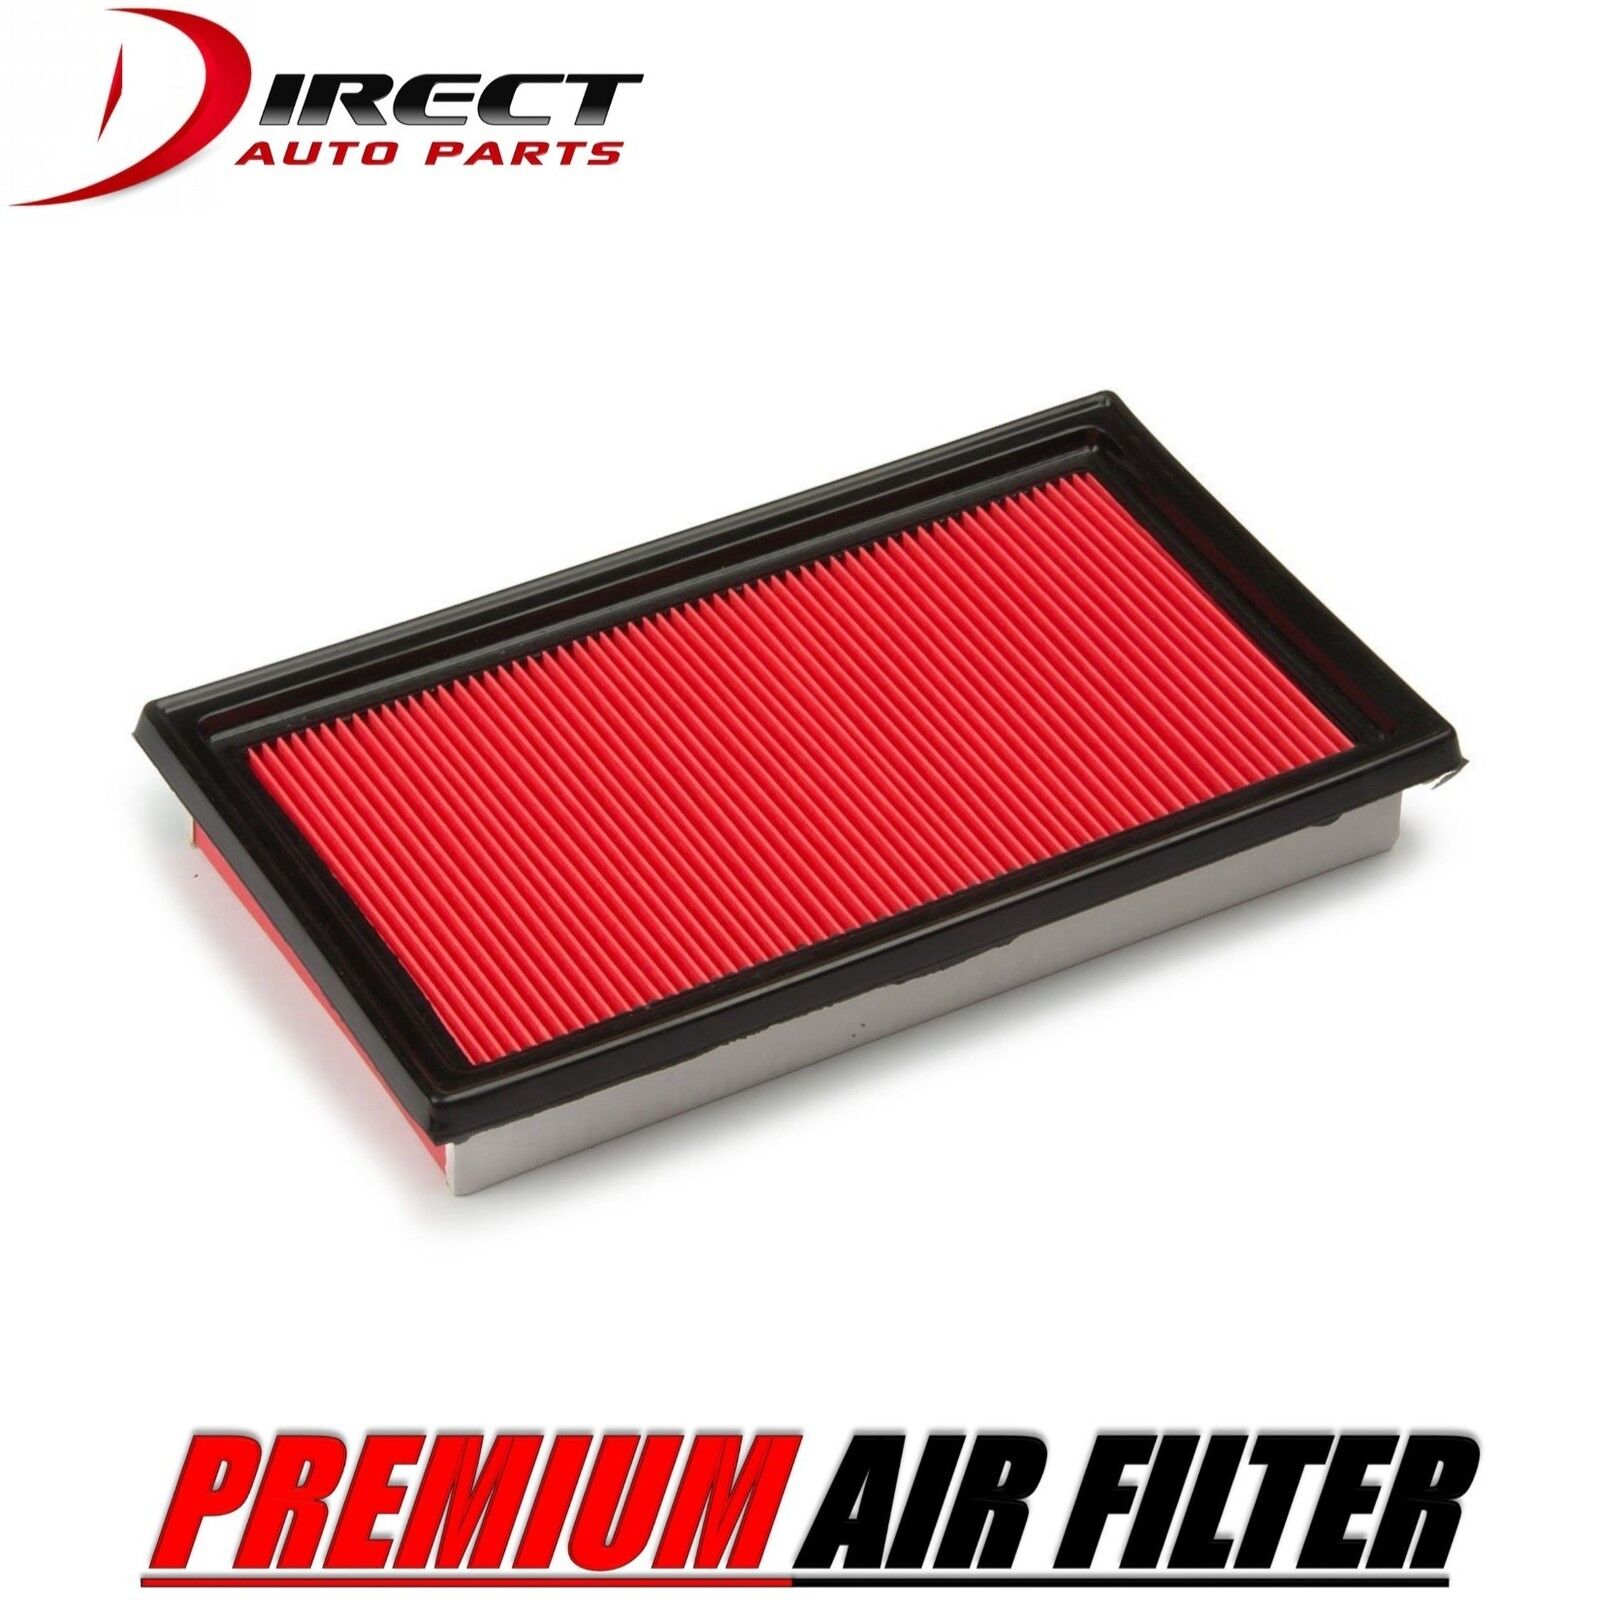 AIR FILTER FOR NISSAN FITS VERSA 1.8L ENGINE 2012 - 2007